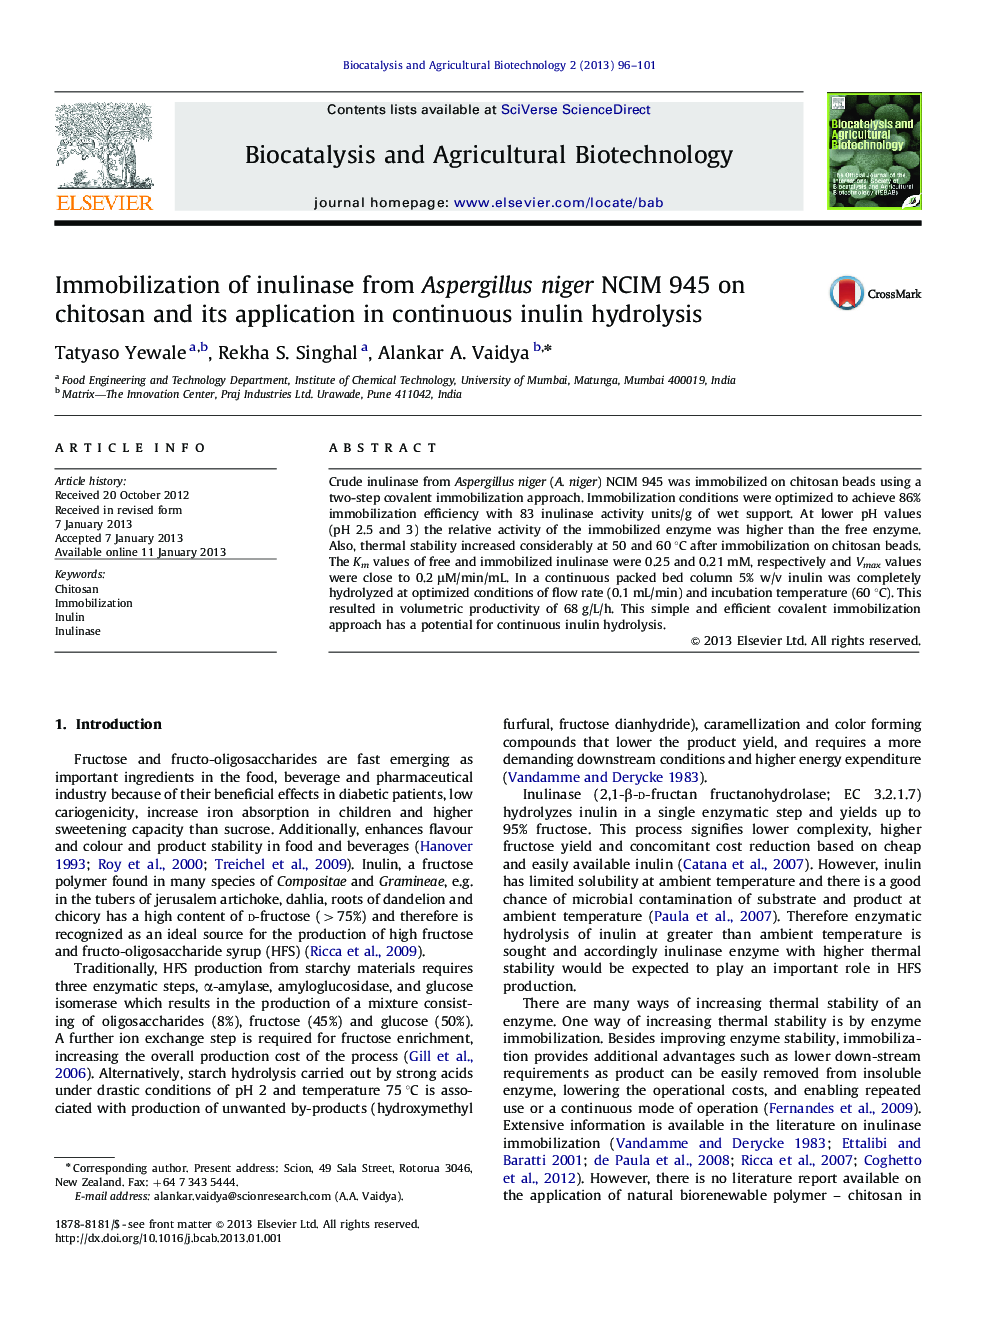 Immobilization of inulinase from Aspergillus niger NCIM 945 on chitosan and its application in continuous inulin hydrolysis